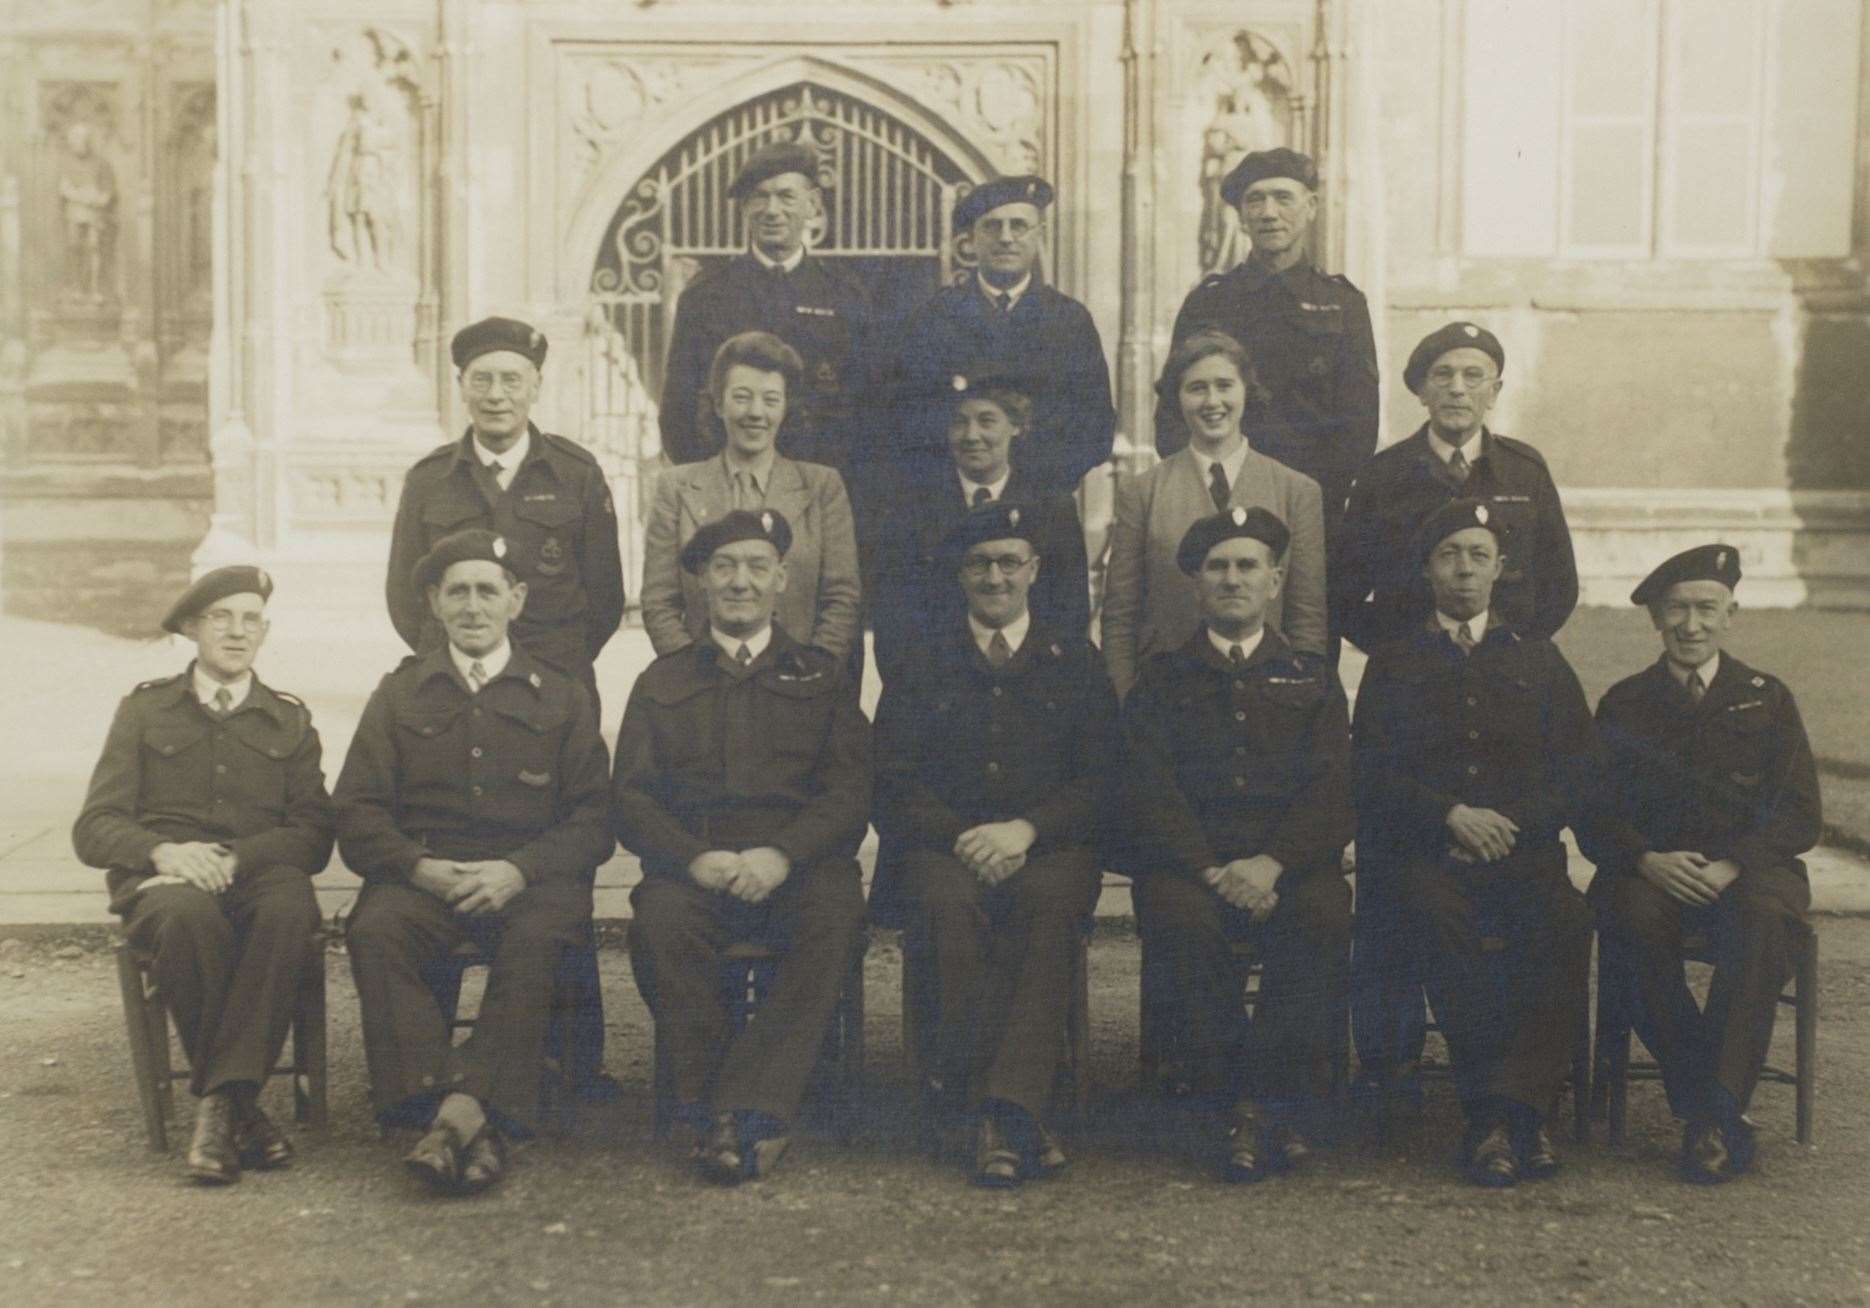 Joe Wanstall, pictured right, back row, was among the fire watchers at the Cathedral on June 1, 1942